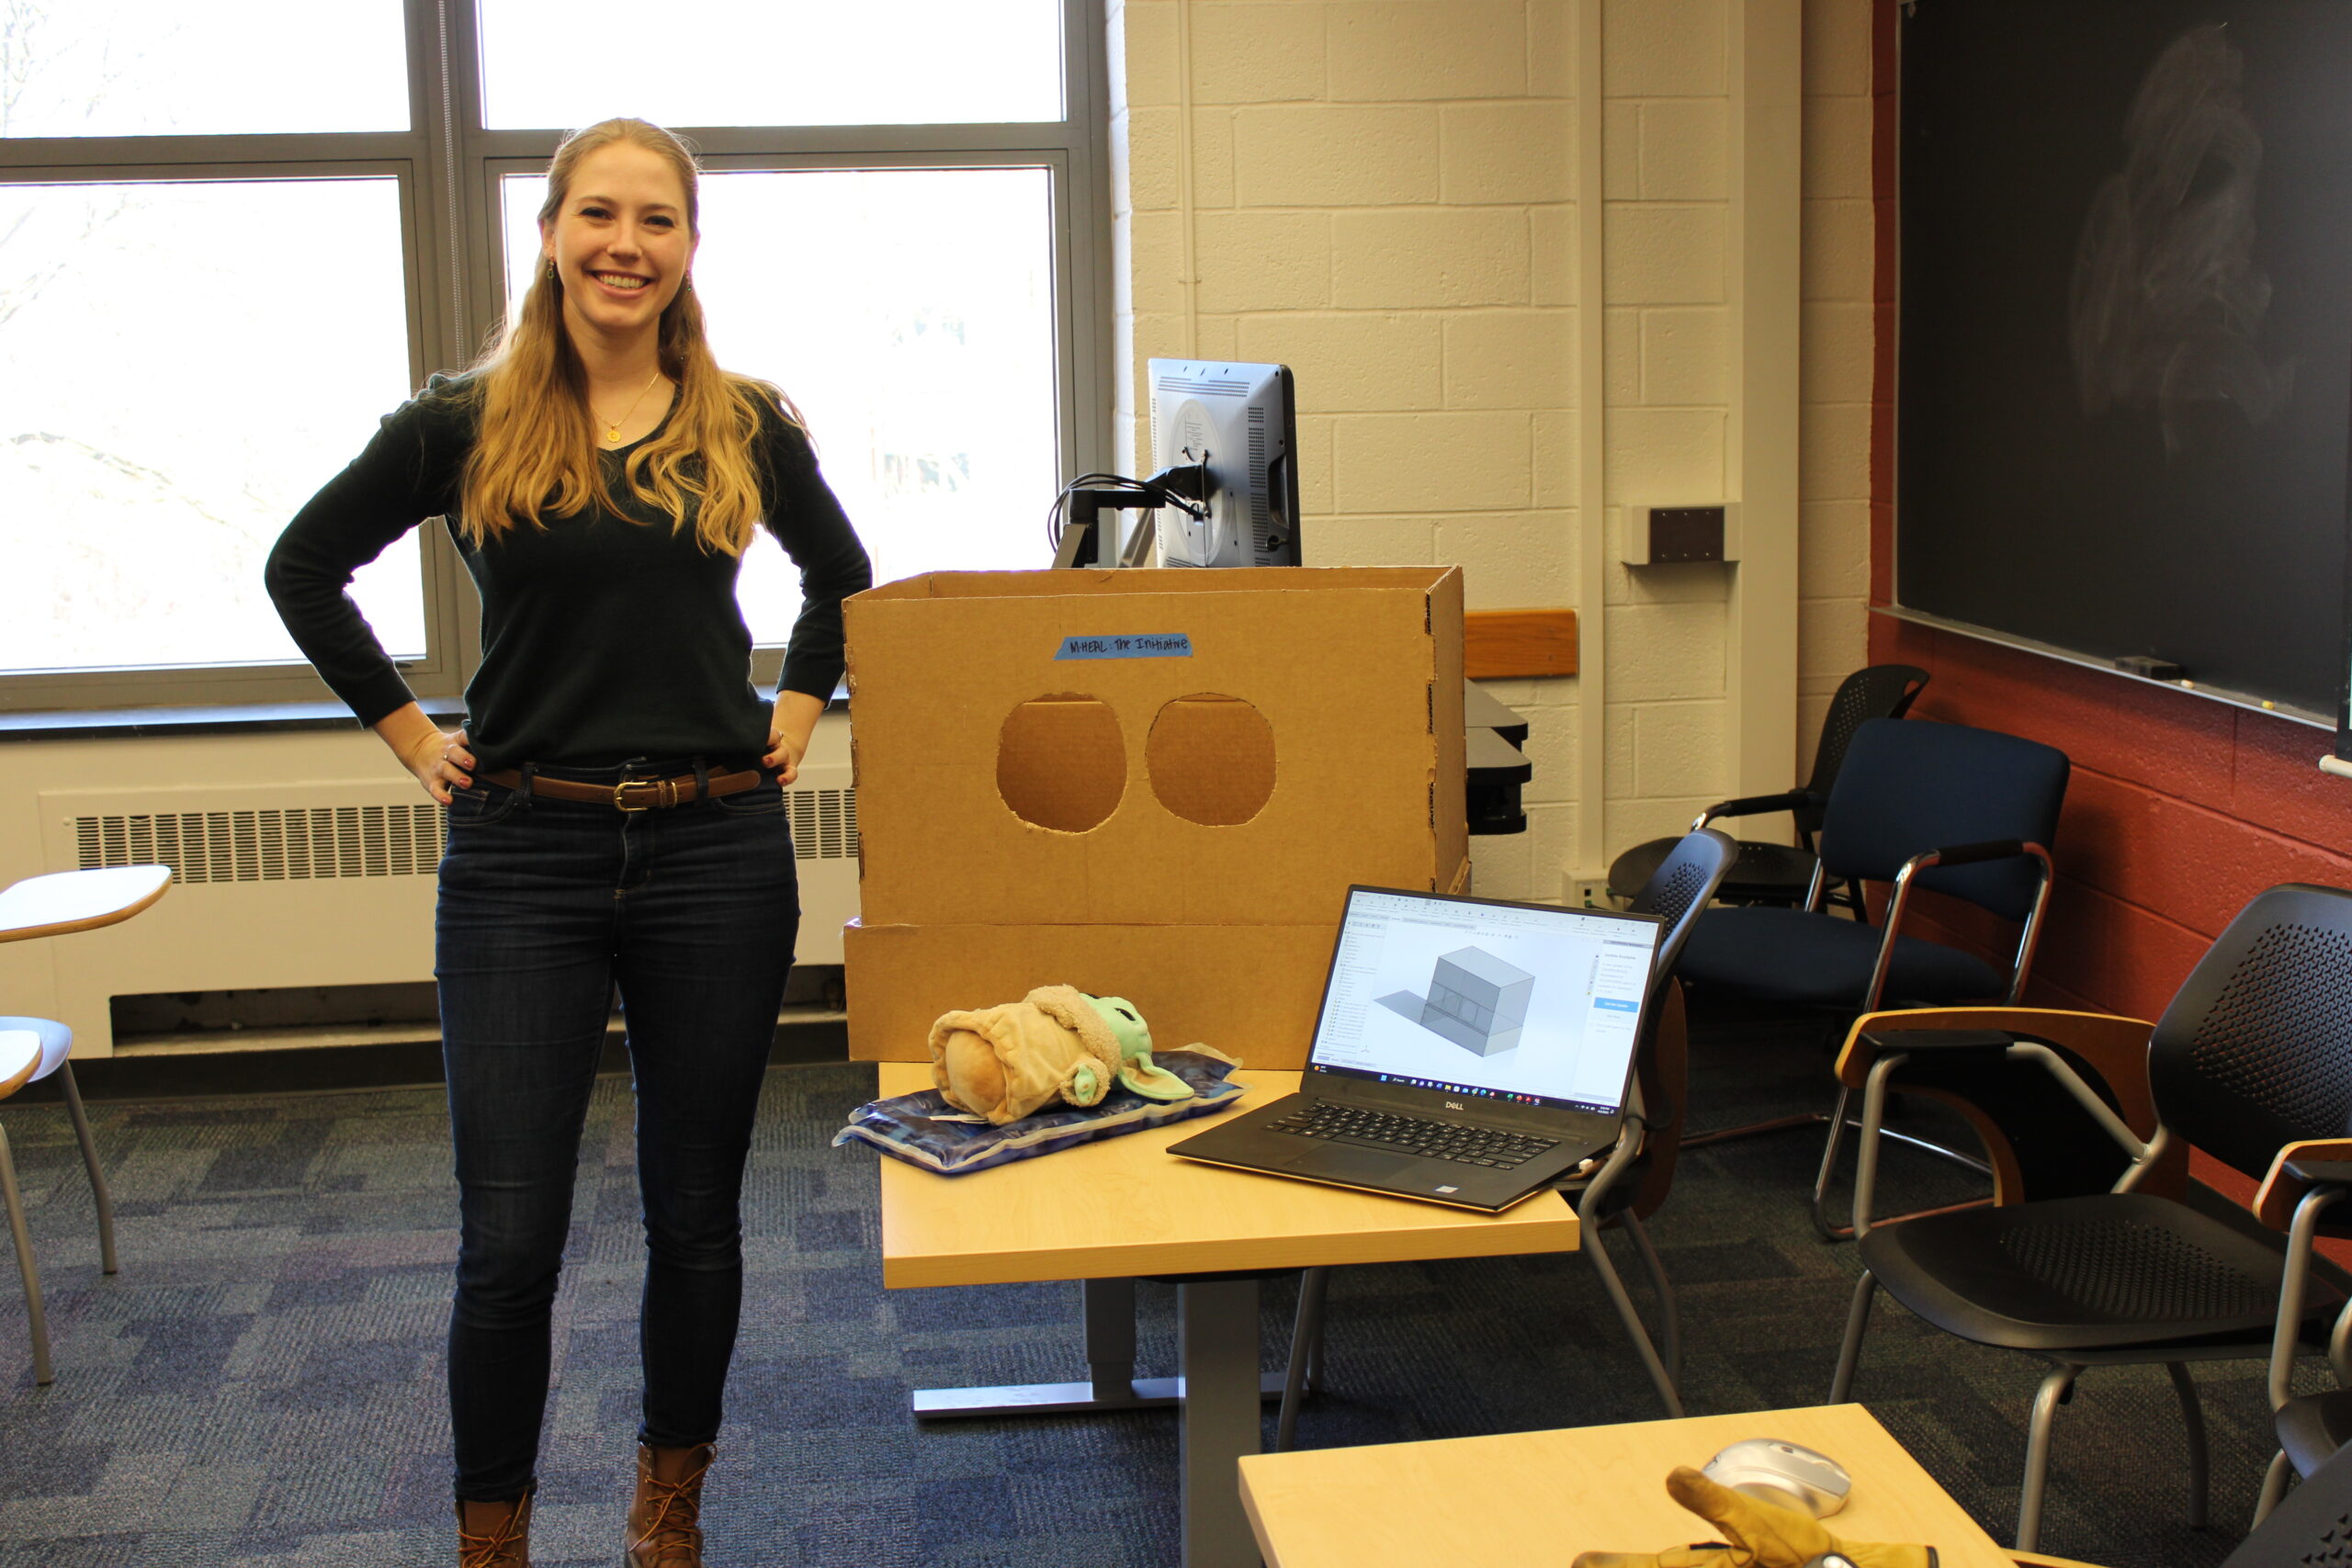 Erin stands next to a cardboard box prototype